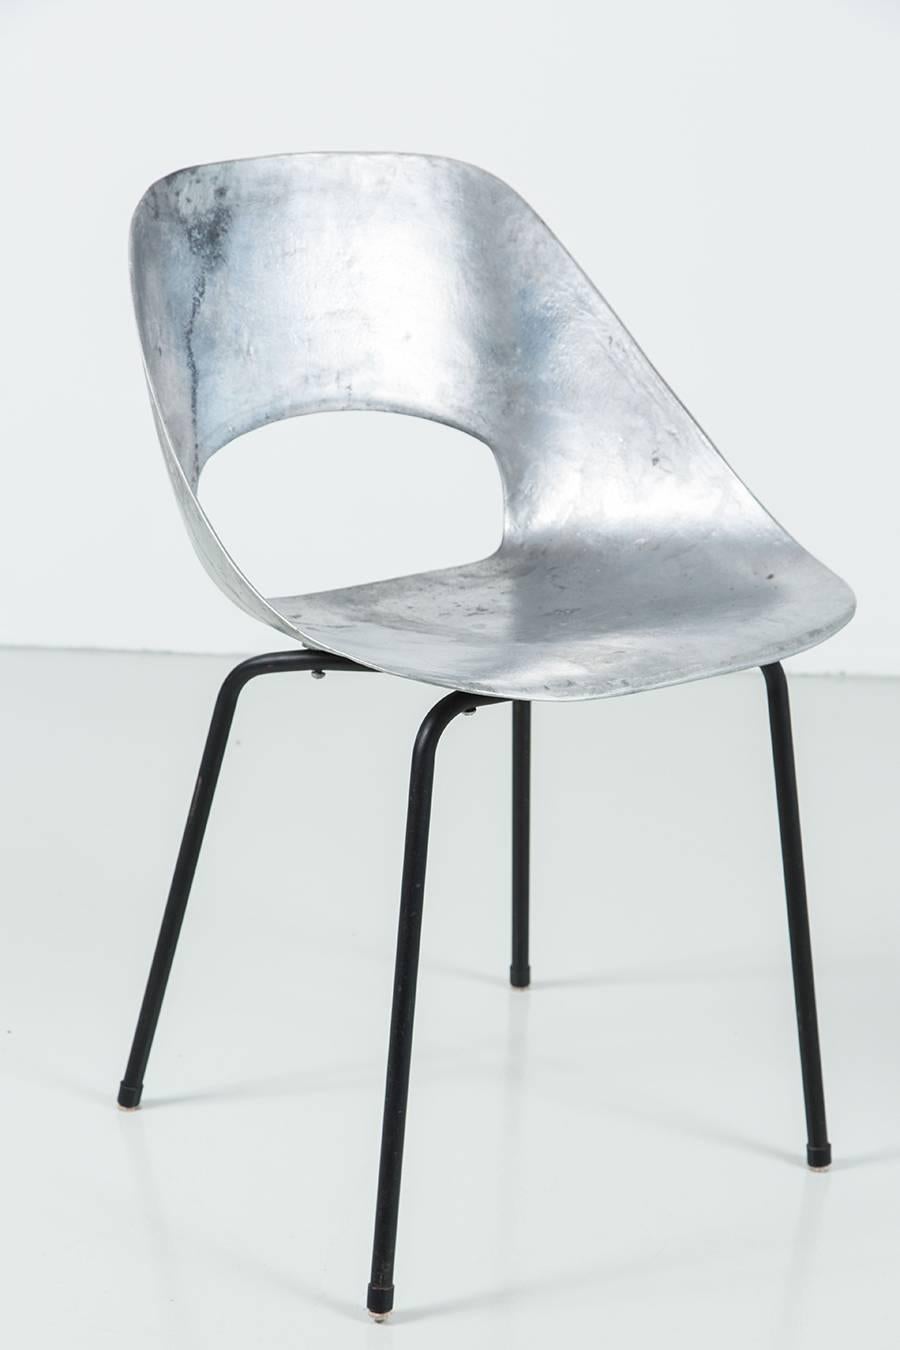 Incredible cast aluminum chairs by Pierre Guariche. Sculpted and curved aluminum seat with cut-out sits on sleek four leg black metal base. 8 available and priced individually.